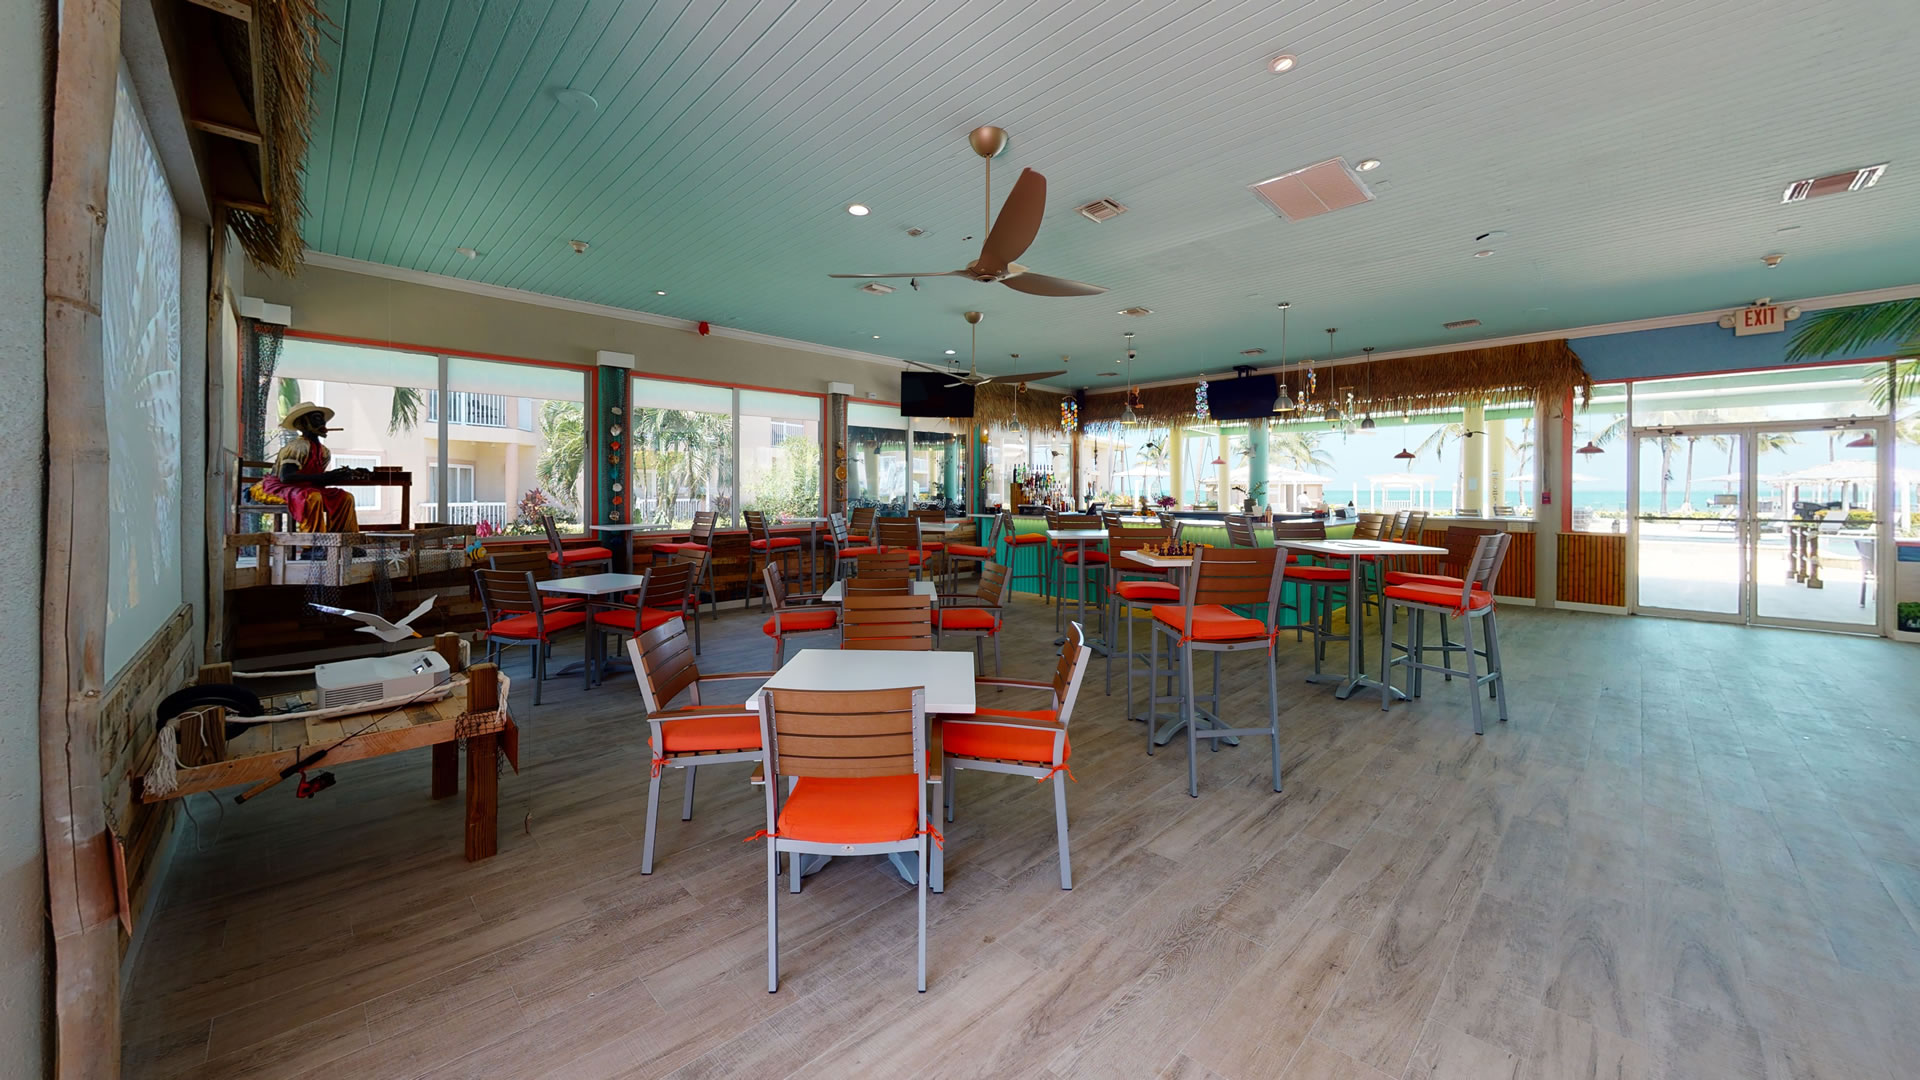 The main dining area within the Driftwood Bar and Grill at the Grand Caymanian Resort.